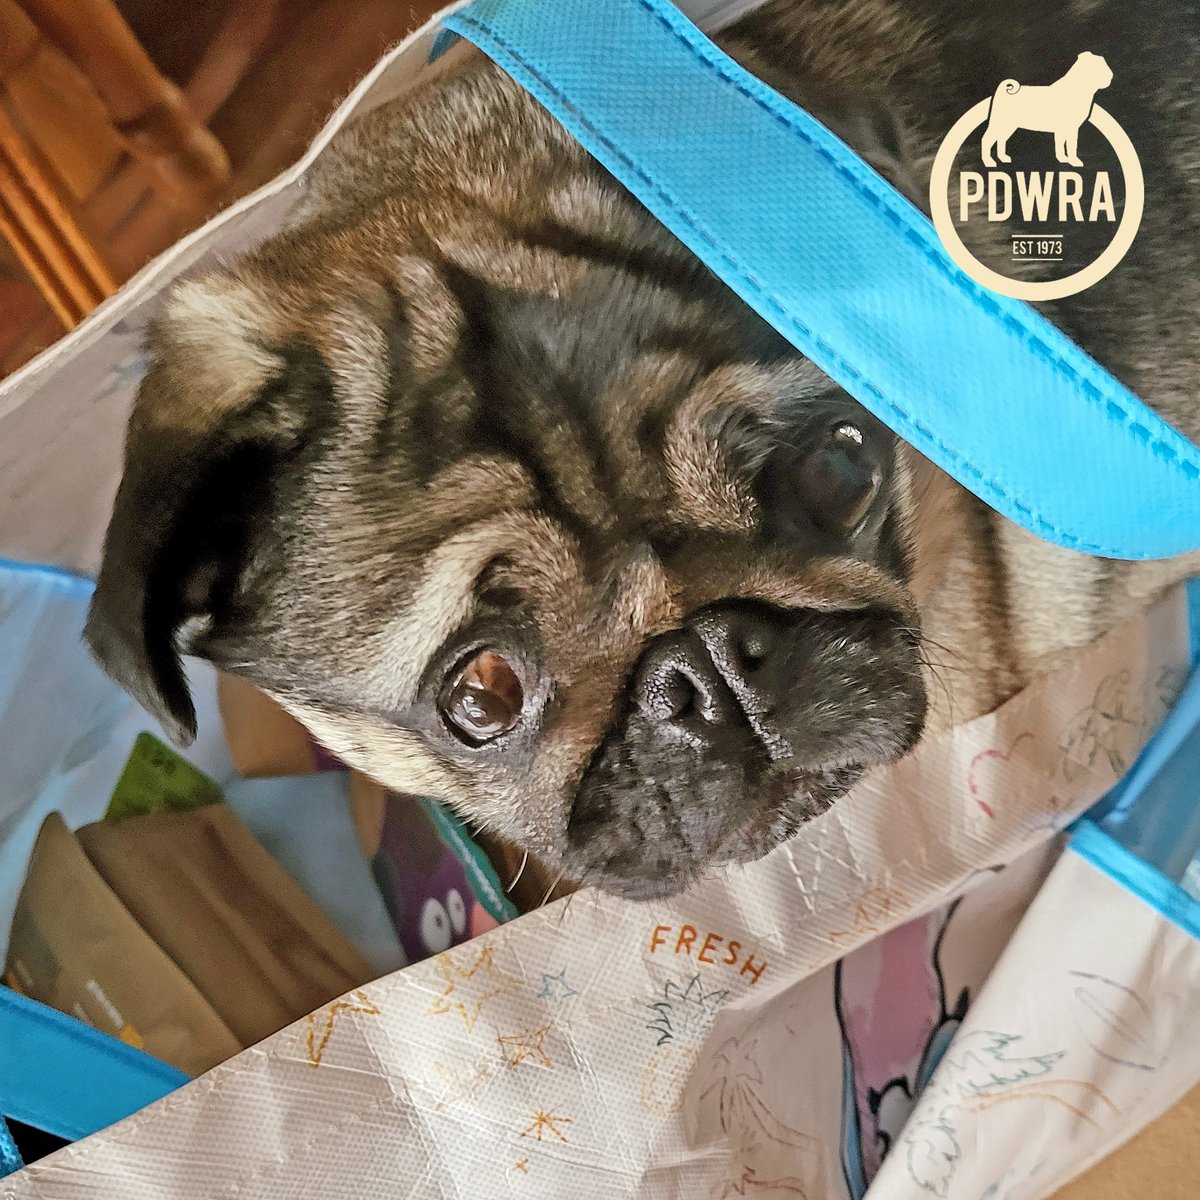 Meet Dot, the pug that proves disability doesn’t define destiny! Despite being blind, she’s a spirited bundle of joy, both independent and resilient. To read more about Dot's story, just click here - 
ecs.page.link/sYb4T 
#pdwra #pugcharity #pugwelfare #pugadoption #pug